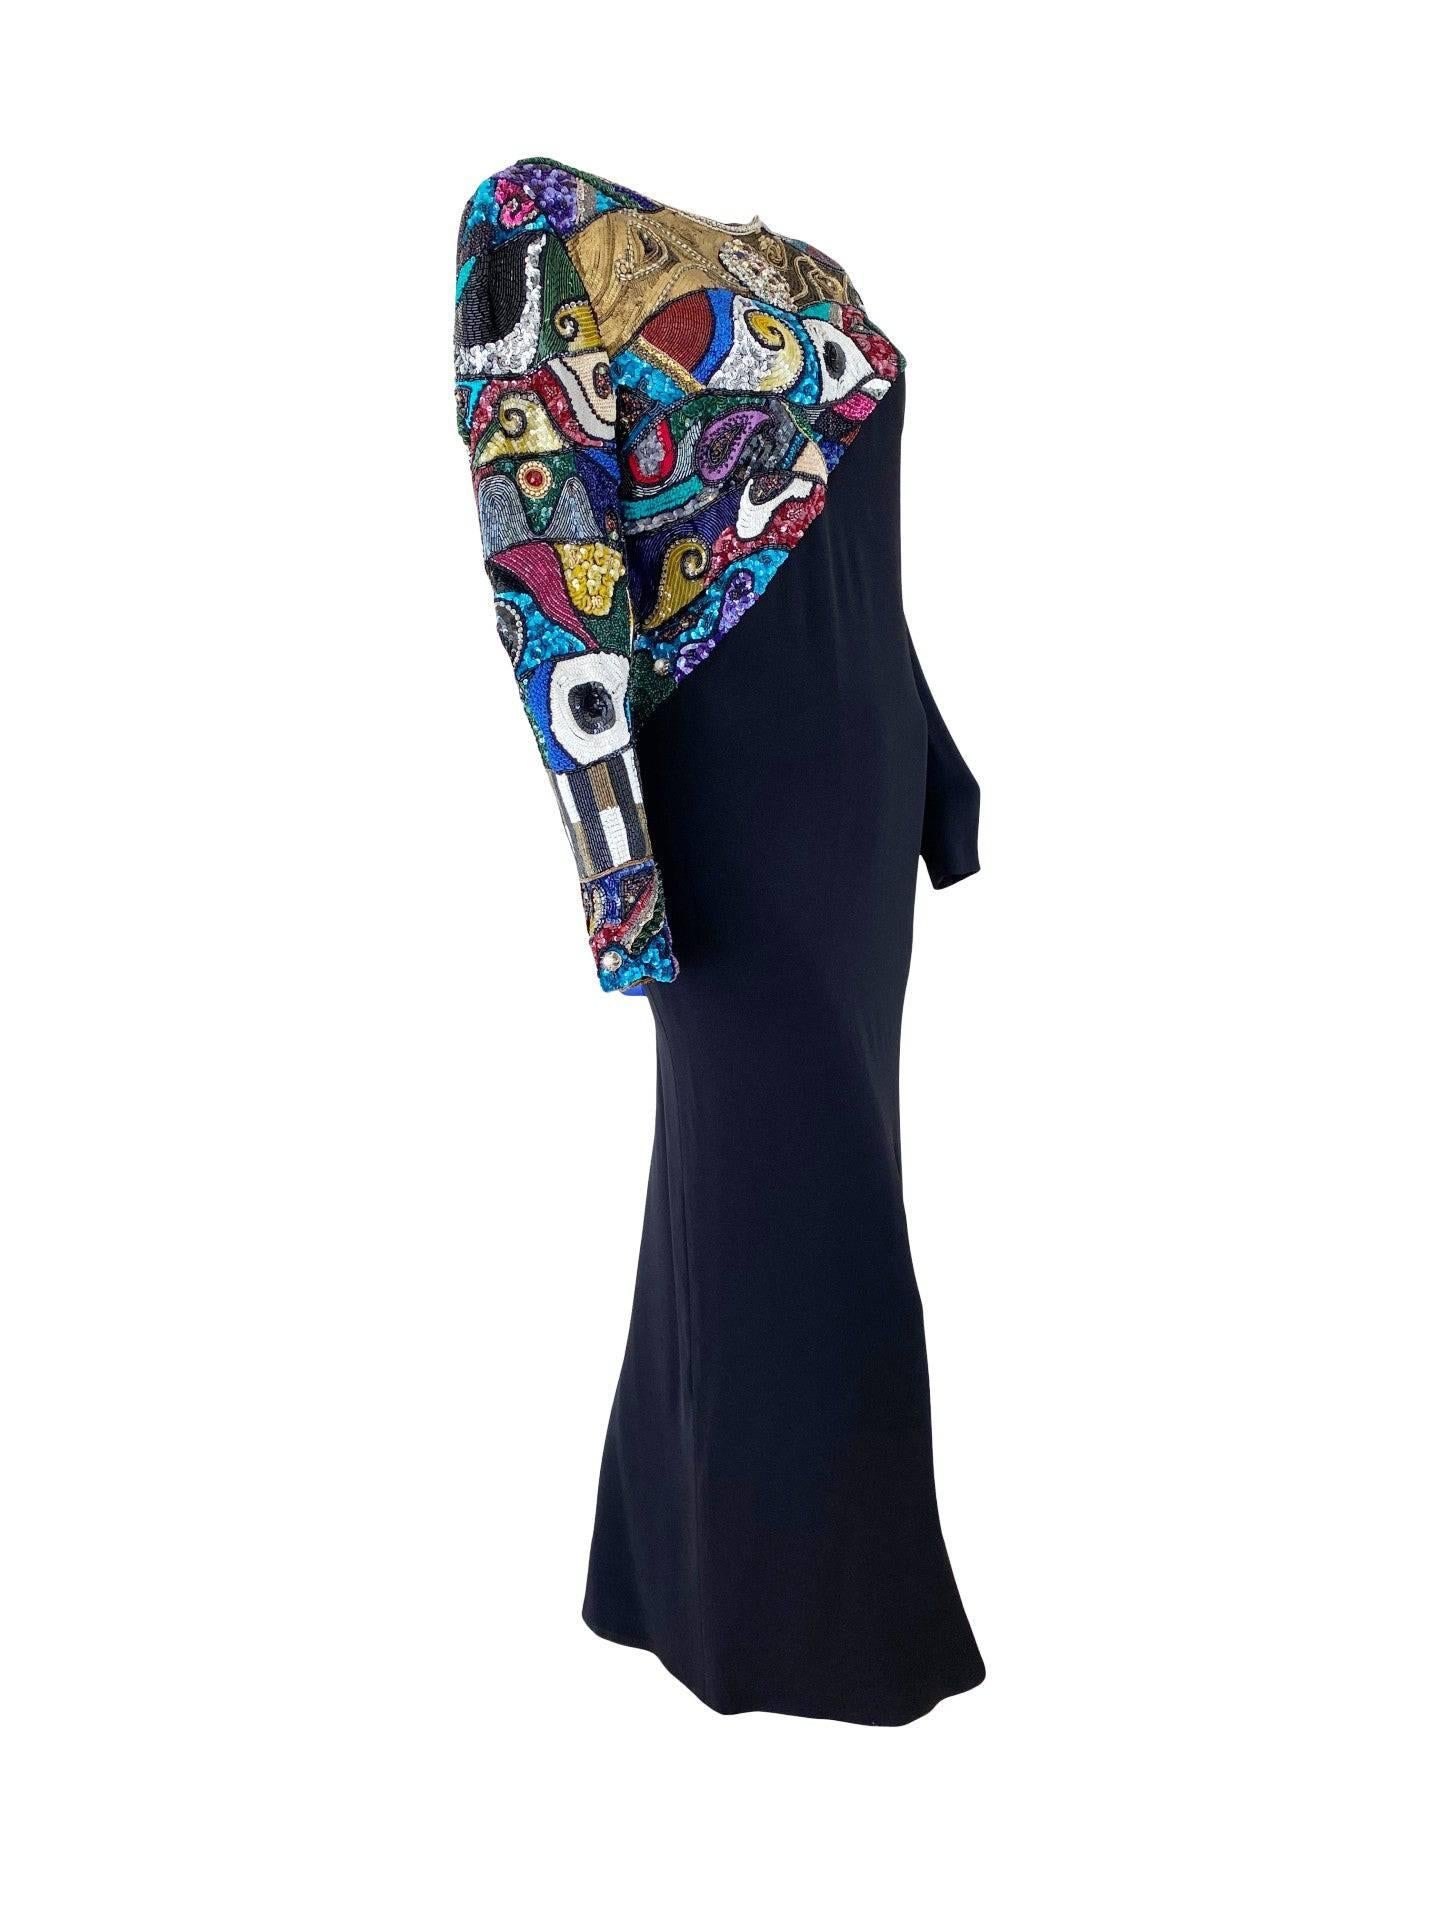 This dress is quite fabulous! A Louis Feraud from the 1980s, it’s asymmetrically heavily embellished in an abstract mosaic of multiple bead types and saturated jewel tones. Sequins, seed beads, bugle beads, metallic threading and rhinestones have